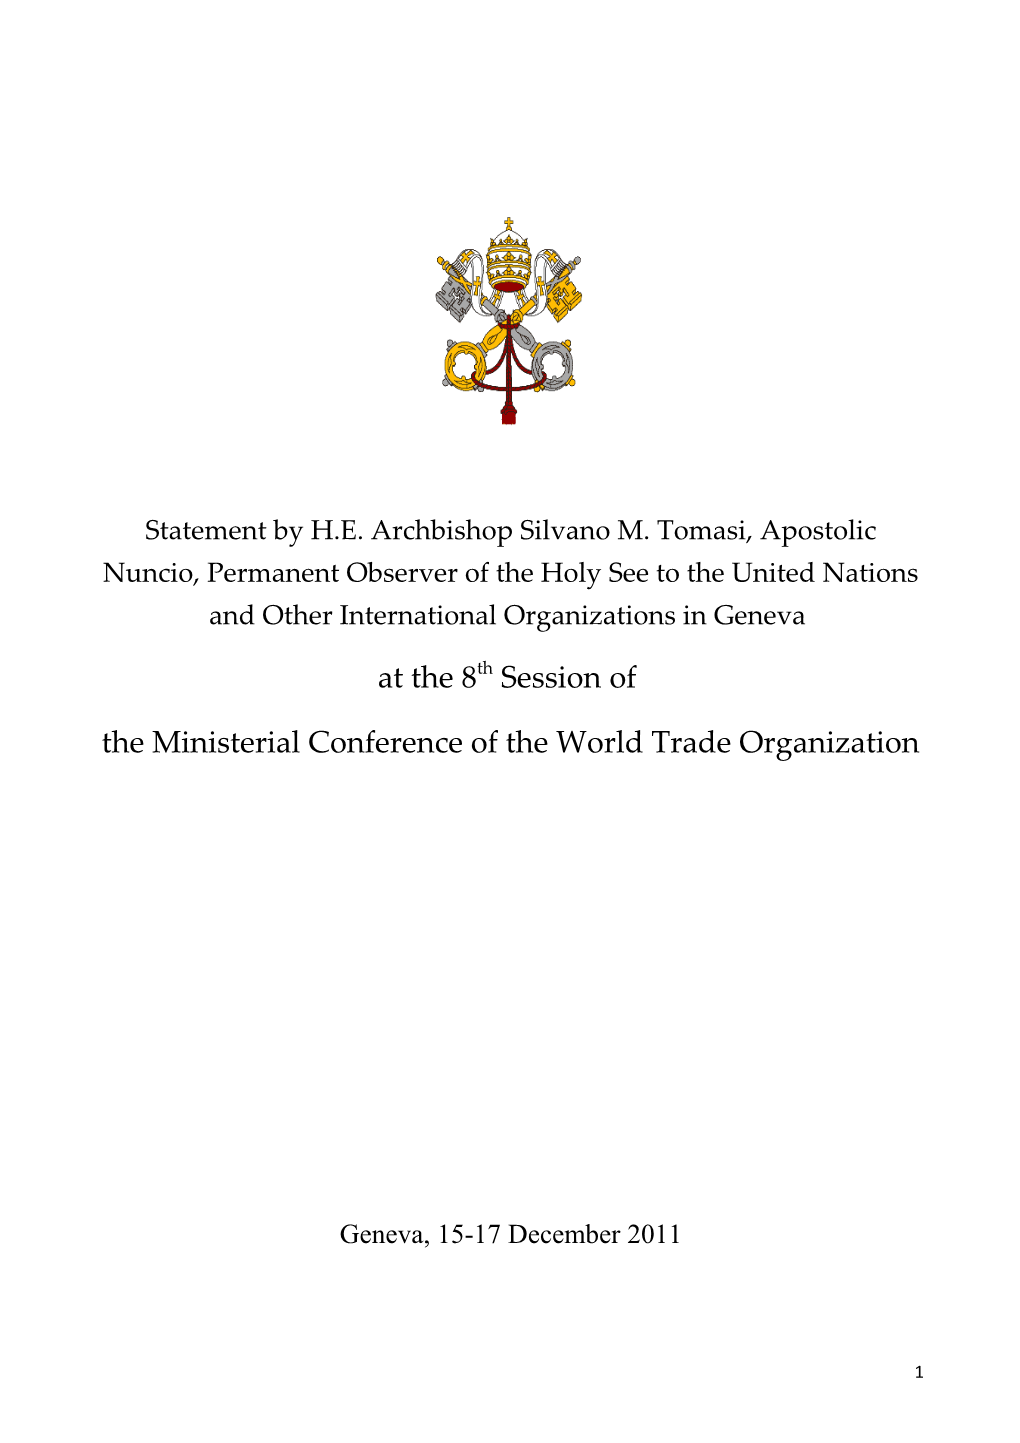 The Ministerial Conference of the World Trade Organization